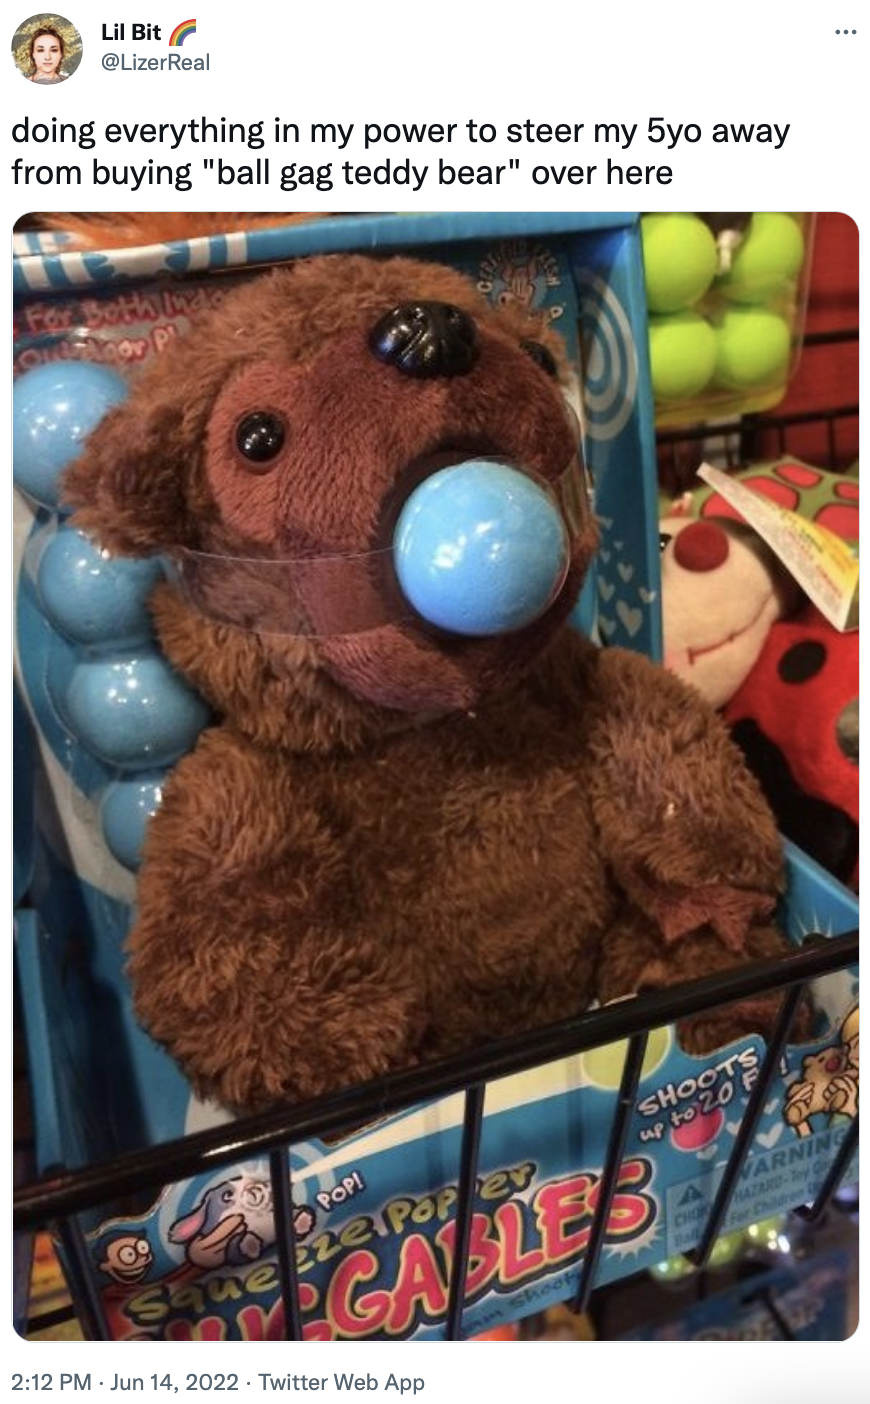 doing everything in my power to steer away my 5 year old from buying &quot;bull gag teddy bear&quot; over here. and then a photo of a teddy bear in the store that&#x27;s being gagged with a ball